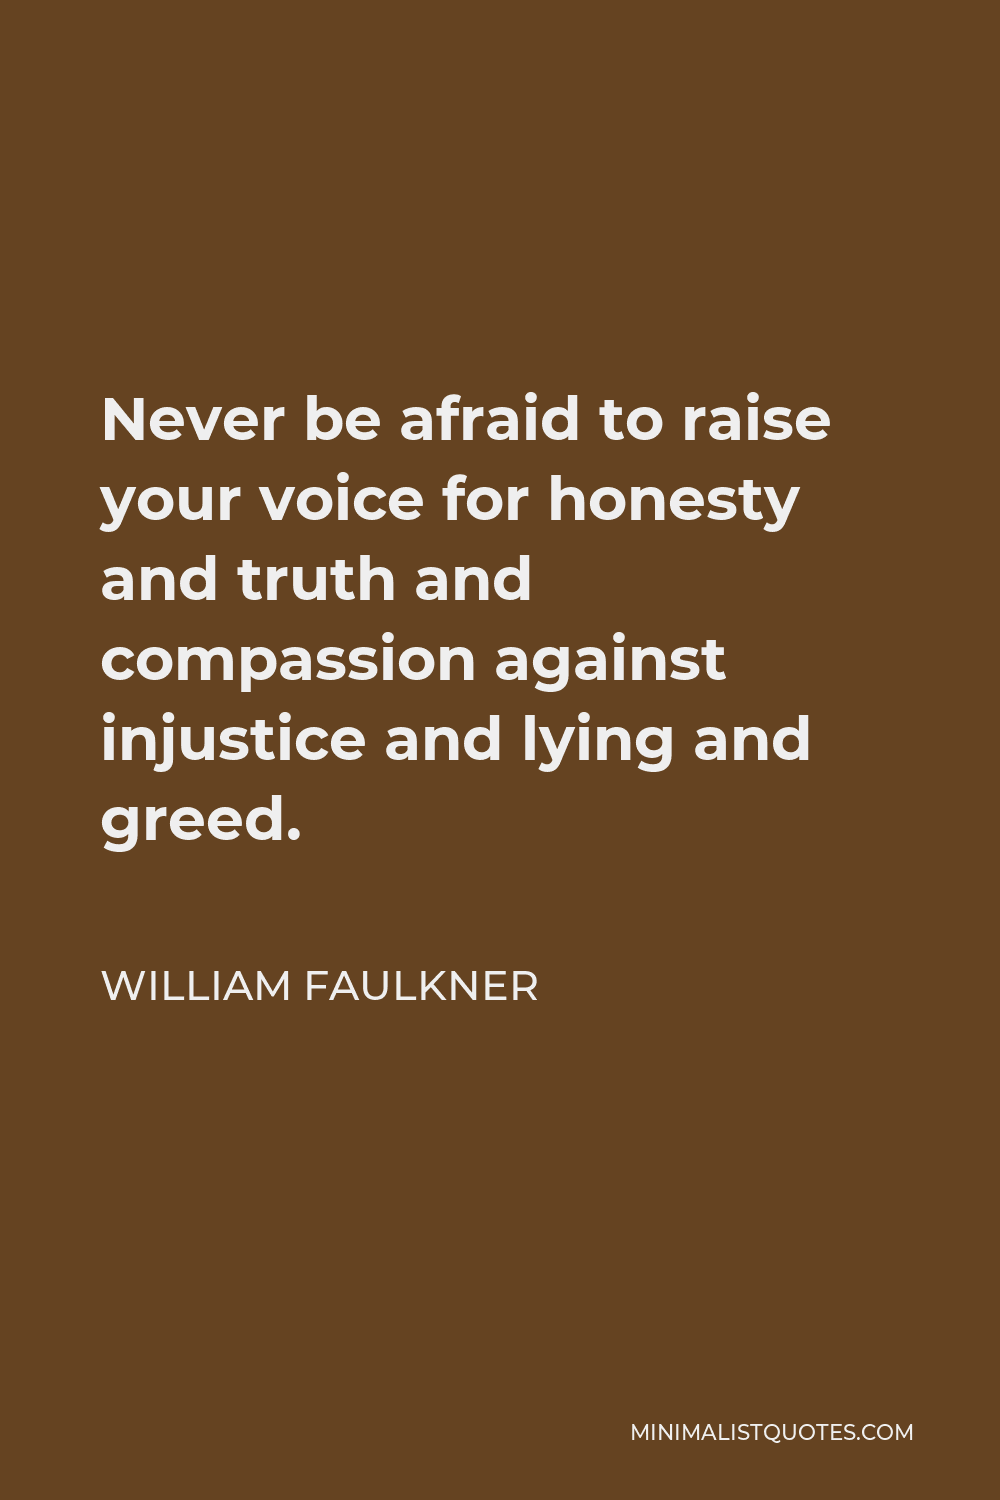 William Faulkner Quote - Never be afraid to raise your voice for honesty and truth and compassion against injustice and lying and greed.